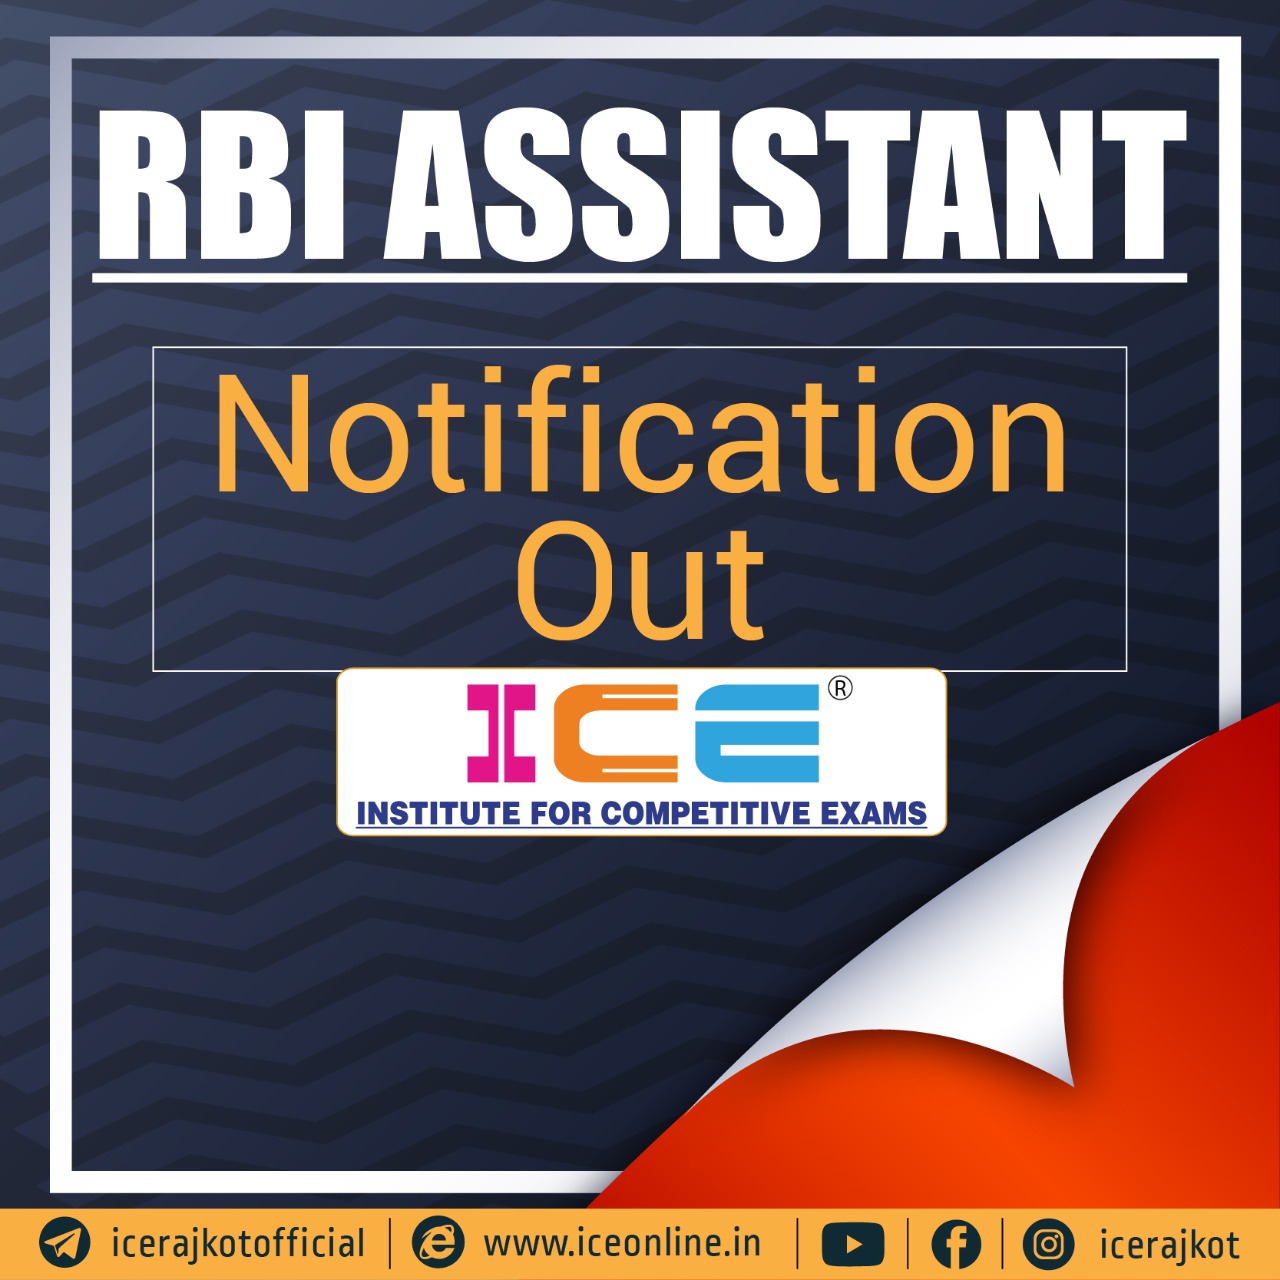 RBI ASSISTANT NOTIFICATION OUT